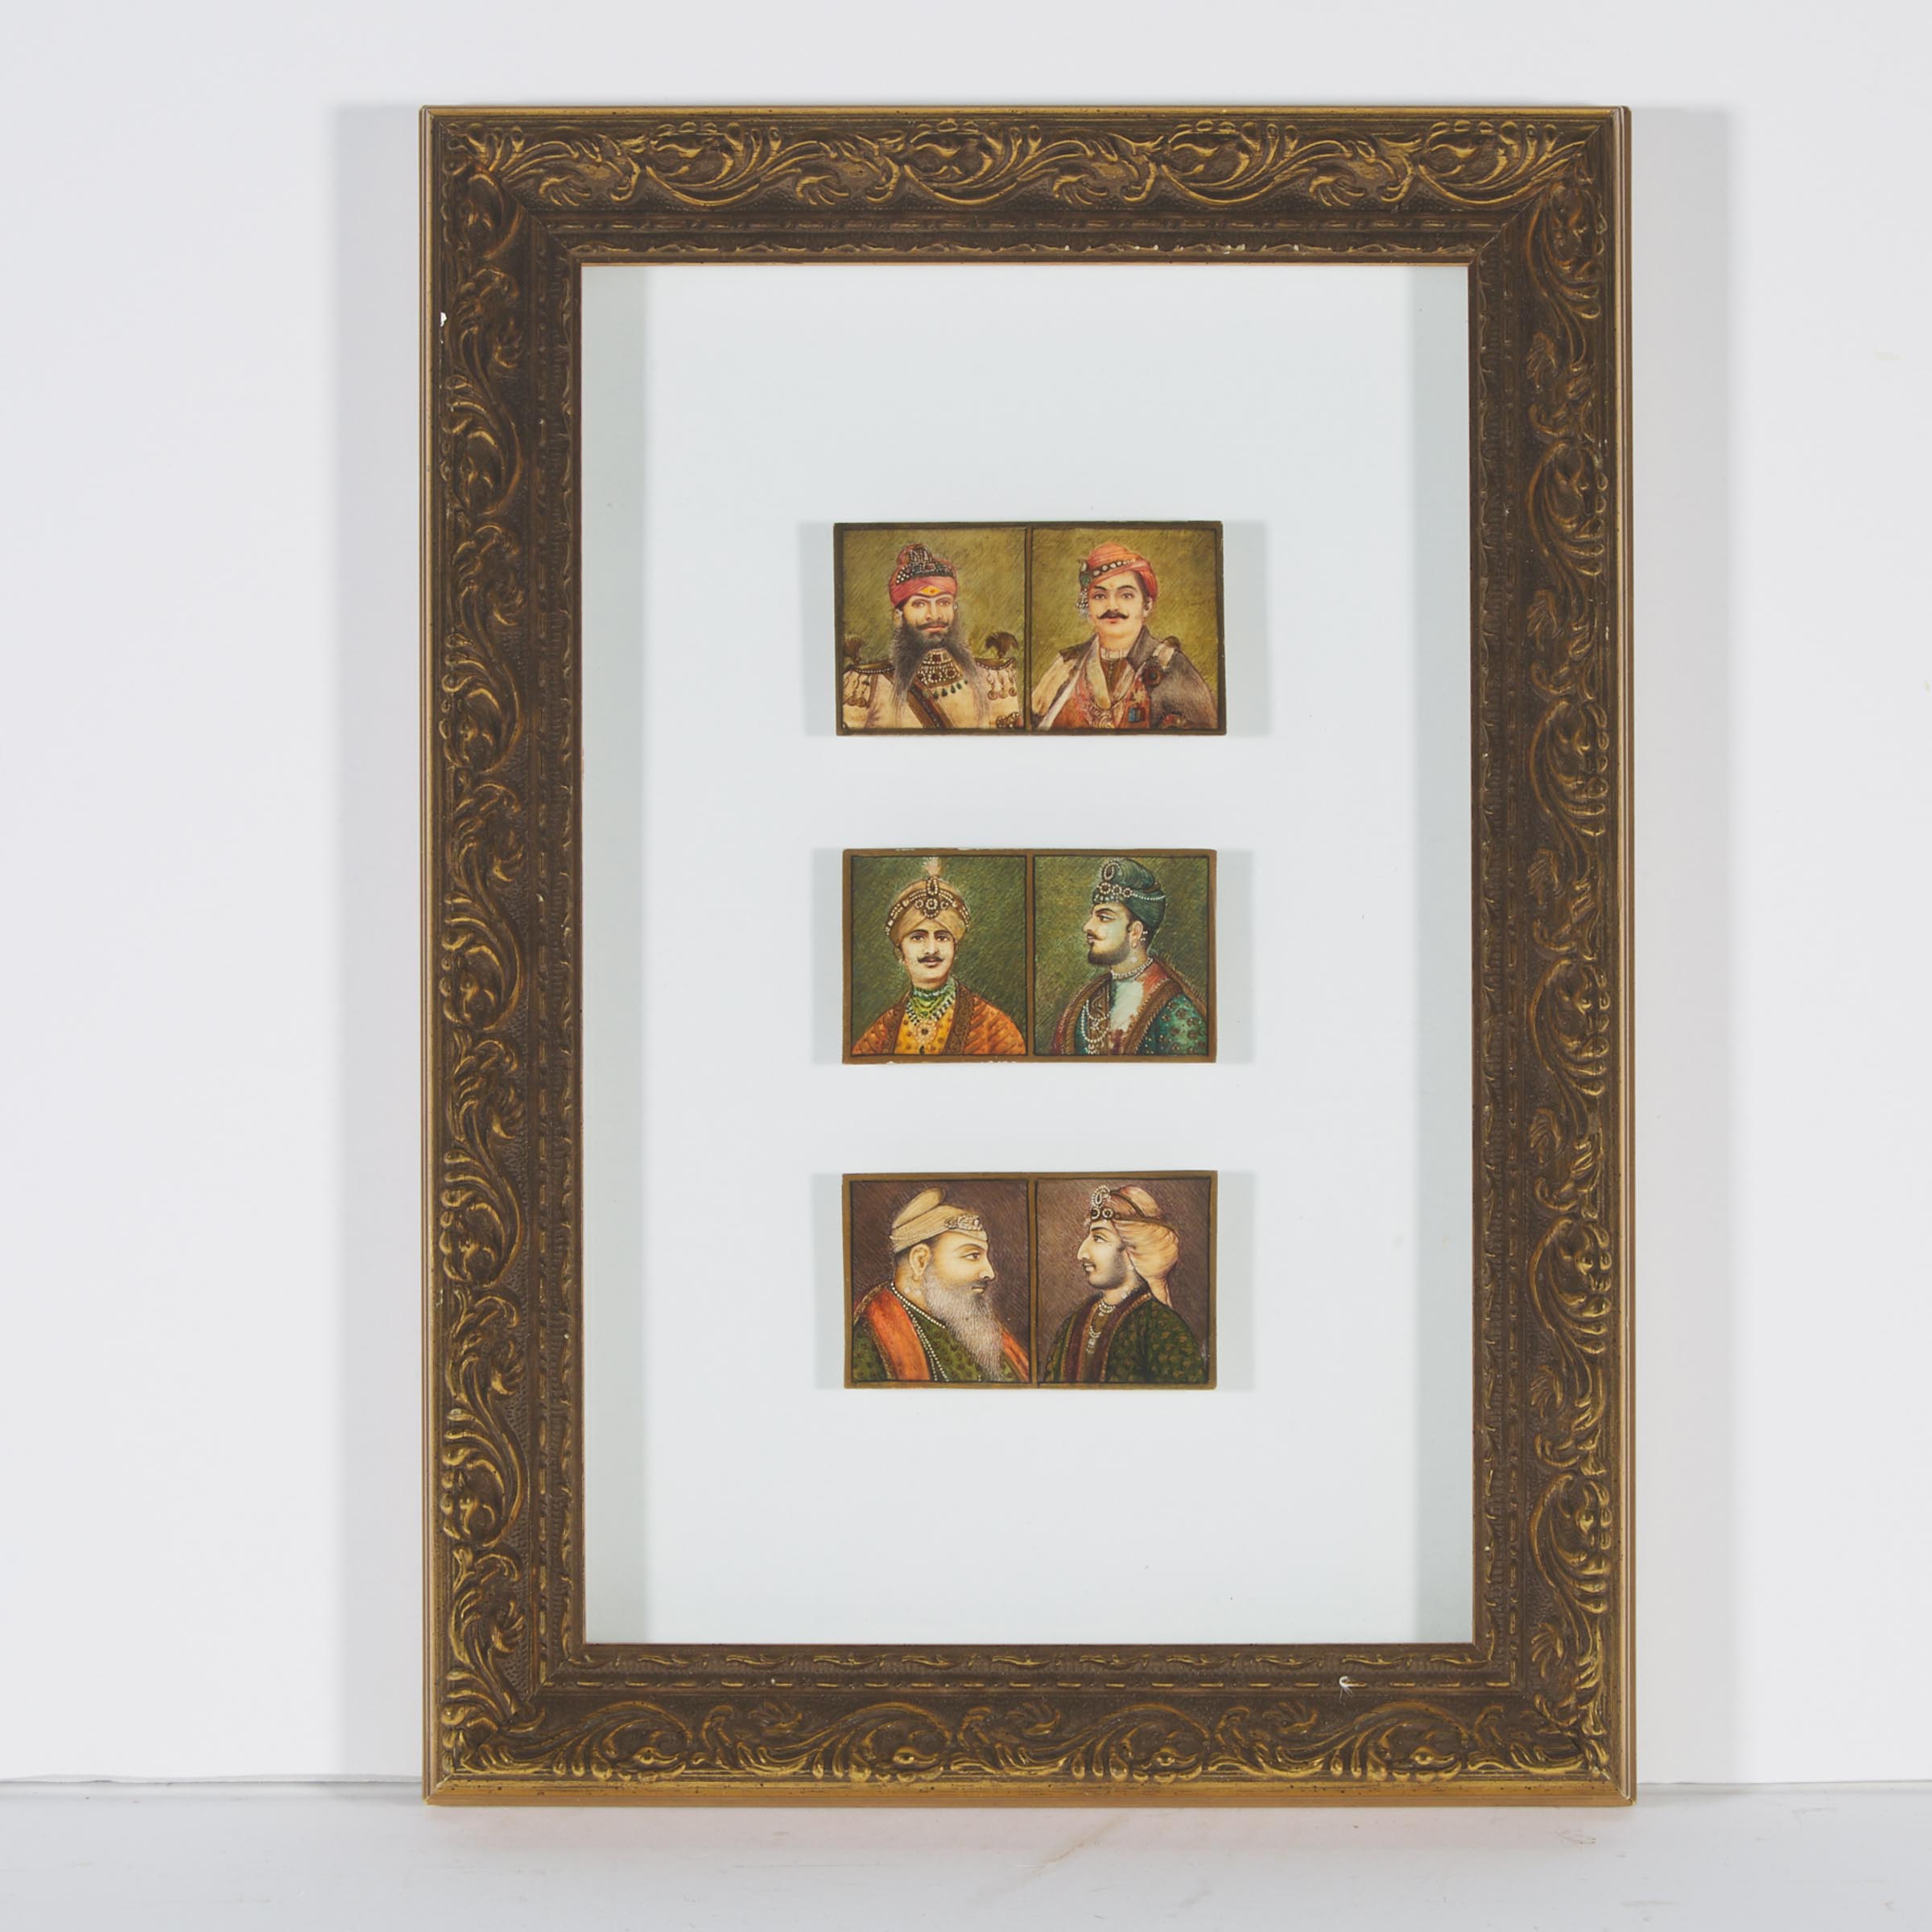 An Ivory Painting of Shah Jahan's Royal Court, Together With a Framed Set of Miniature Portraits on Ivory, Late 19th Century